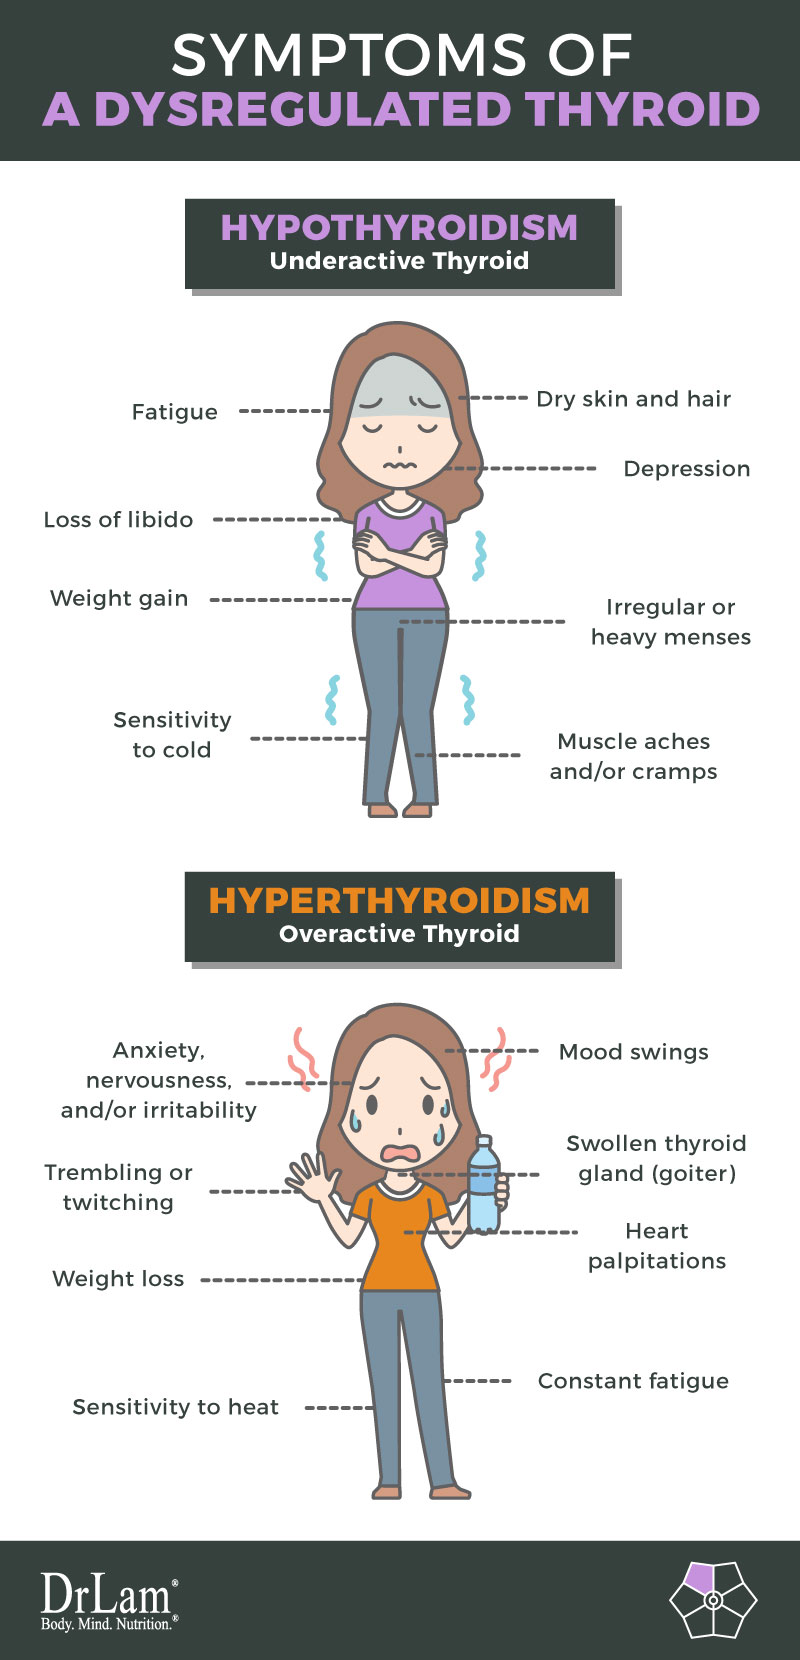 Check out this easy to understand infographic about the symptoms of a dysregulated thyroid